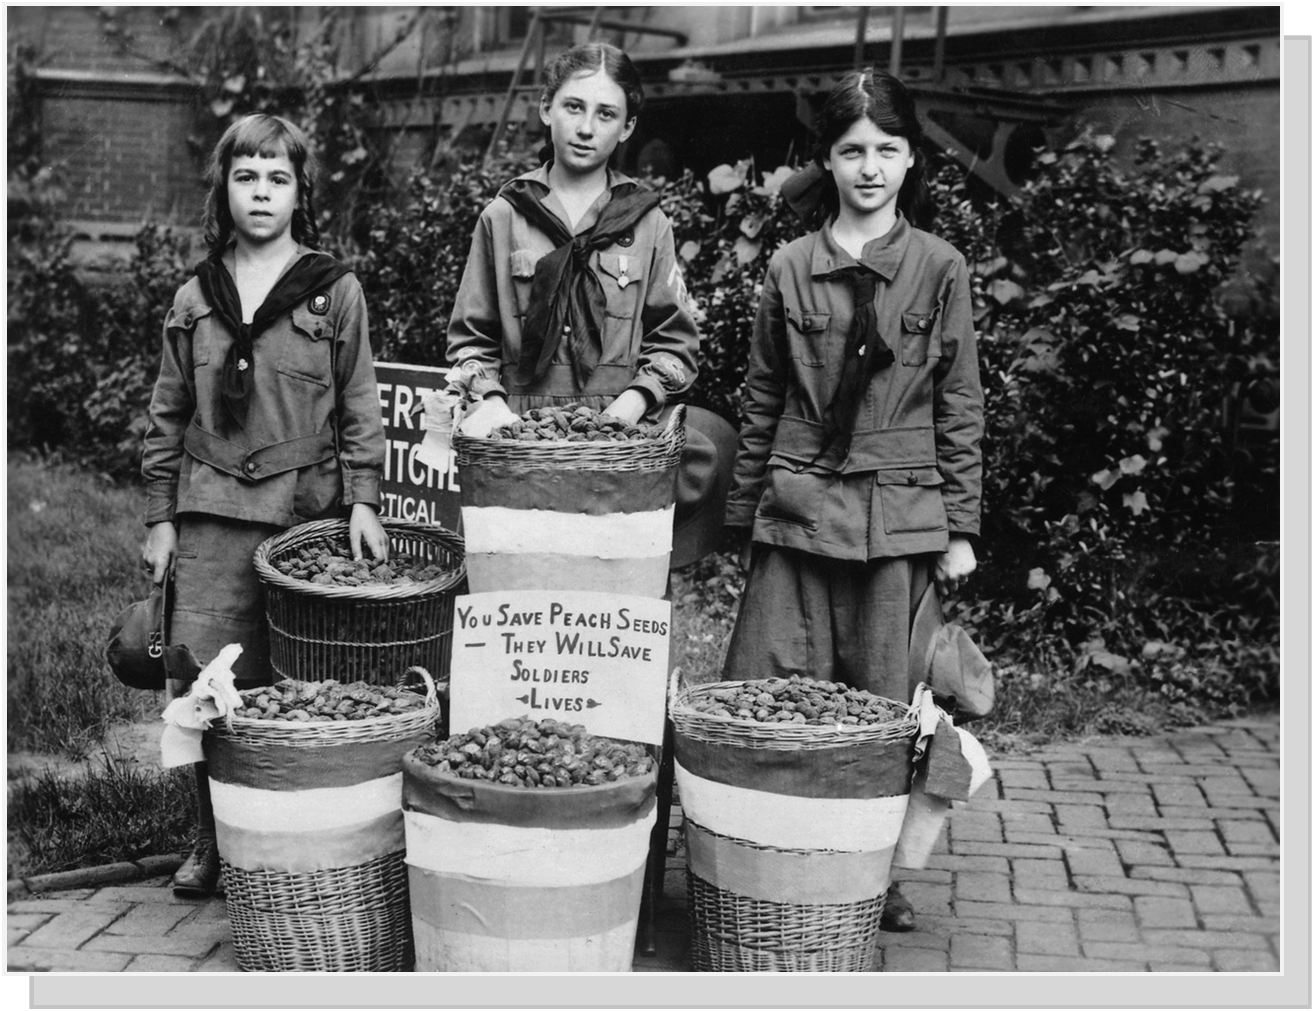 Peach Pits turned into carbon for gas mask filters, Washington DC 1916.